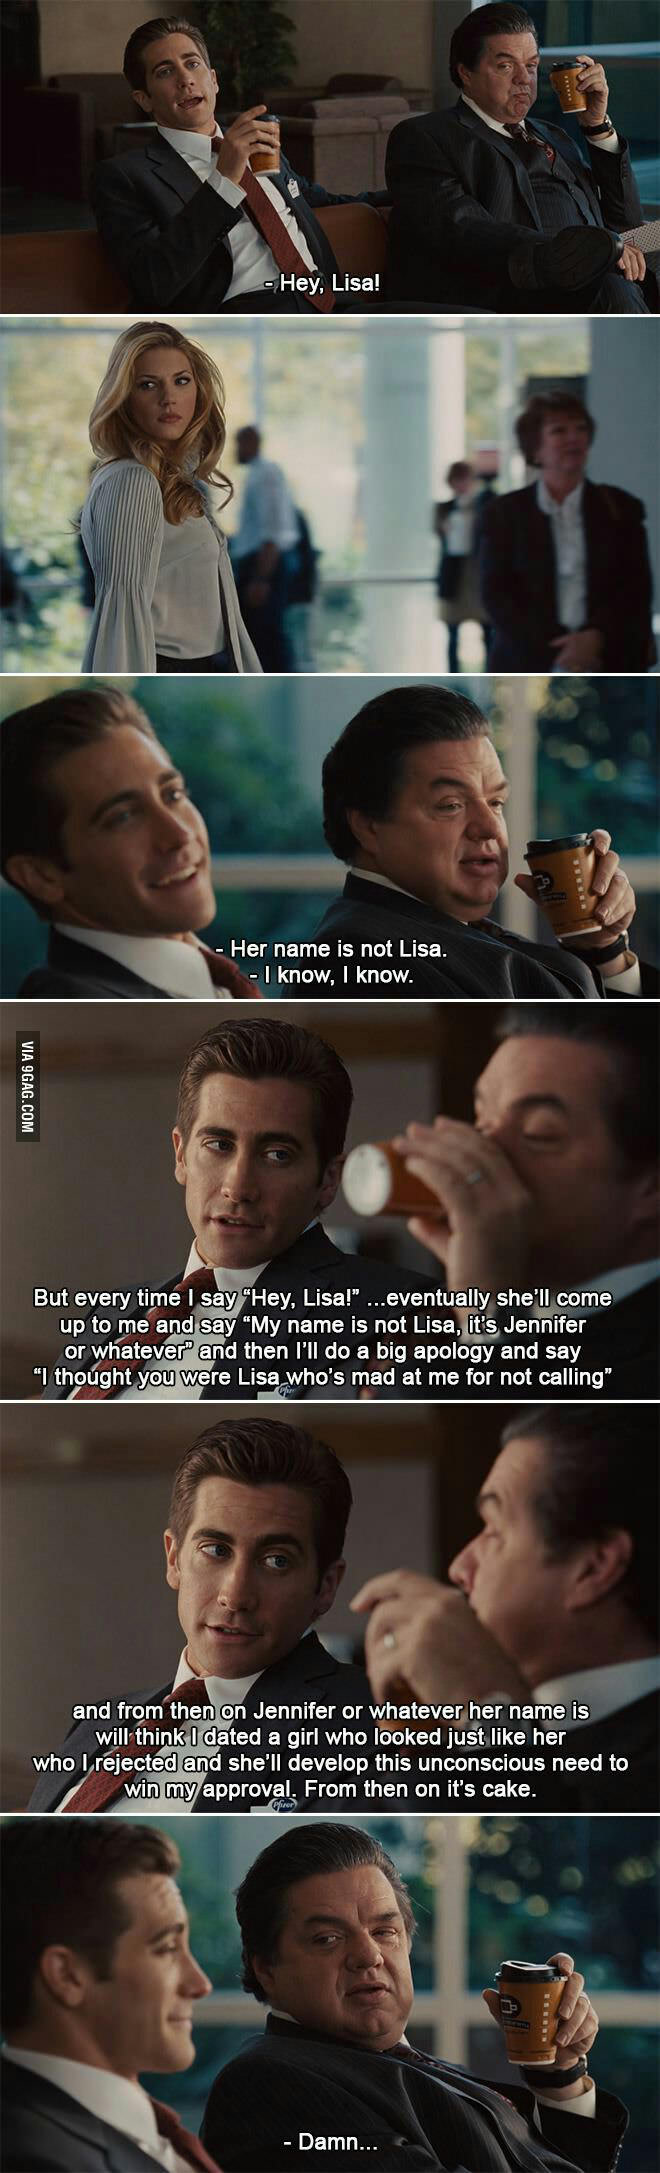 love and other drugs hey lisa - Hey, Lisa! Her name is not disa. Her name is not Lisa. I know, I know. Via 9GAG.Com But every time I say "Hey, Lisa!"...eventually she'll come up to me and say "My name is not Lisa, it's Jennifer or whatever and then I'll d